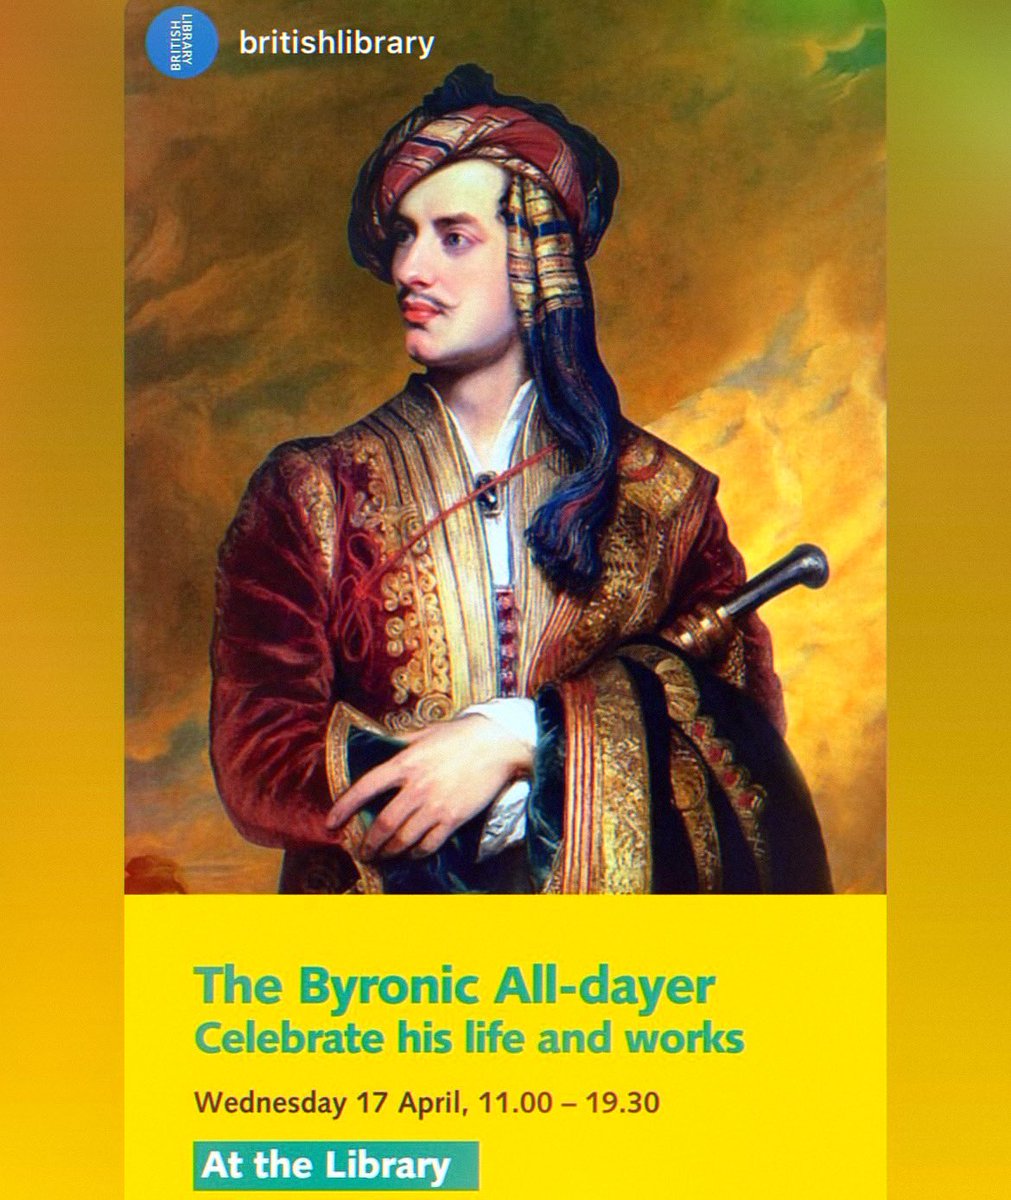 There are also a few FREE tickets available for this celebration of all things Lord Byron on Weds 17 April 👀🤩 Just get in touch with the lovely @BeeRowlatt, who can hook you up - pls share! Full lineup here: …hlibraryculturalevents.seetickets.com/event/the-byro…